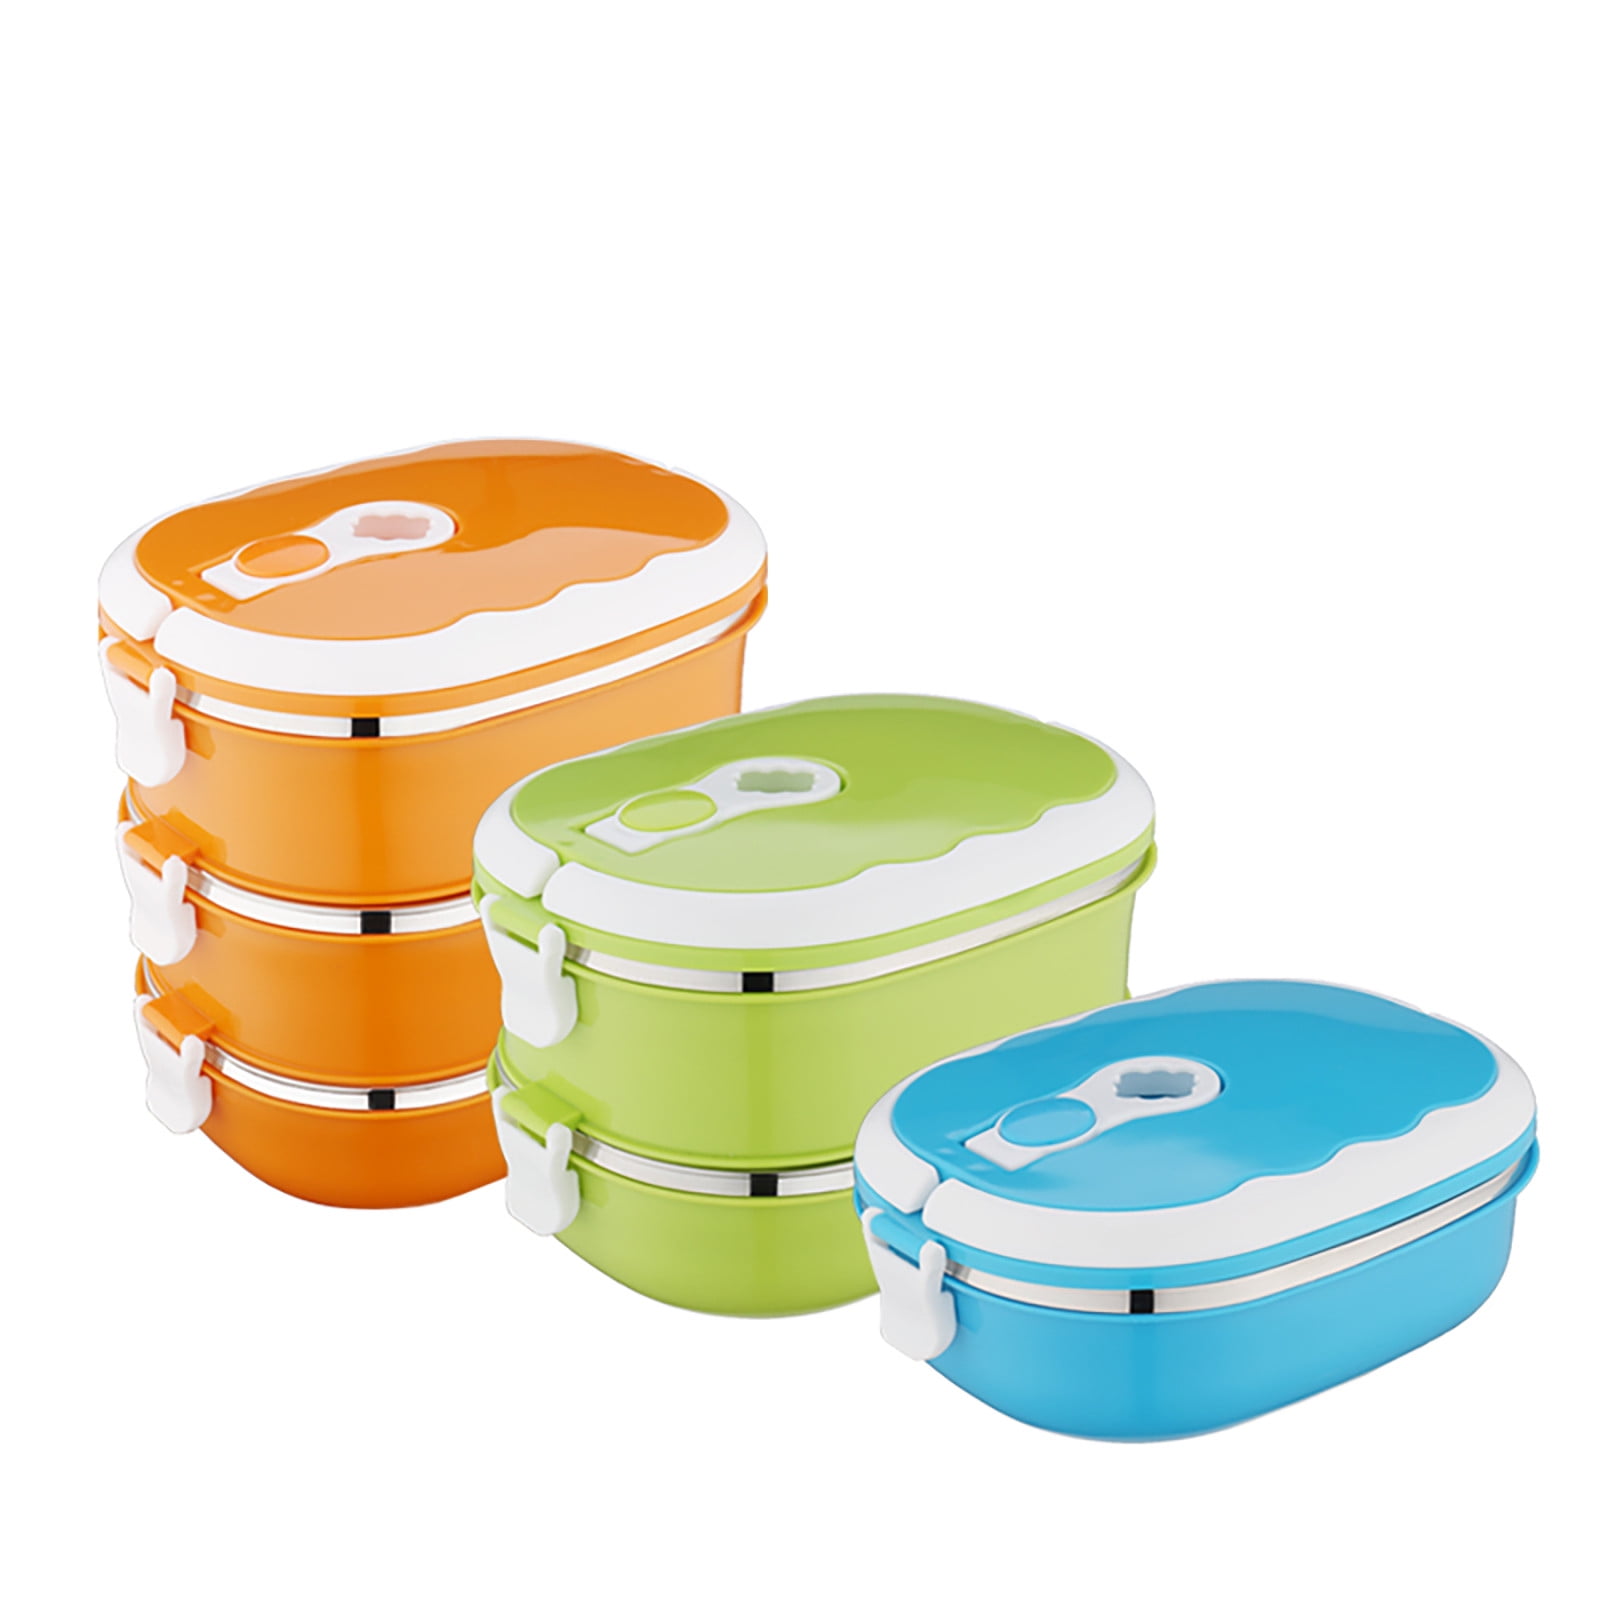 XMMSWDLA Adult Lunch Box Orange Lunch Box2-Layer 1800ml Rectangular Food  Lunch Box Stainless Steel Lunch Box Lunch Box Food Storage Box Children'S  Lunch Box Hot Food Cute Bento Box 